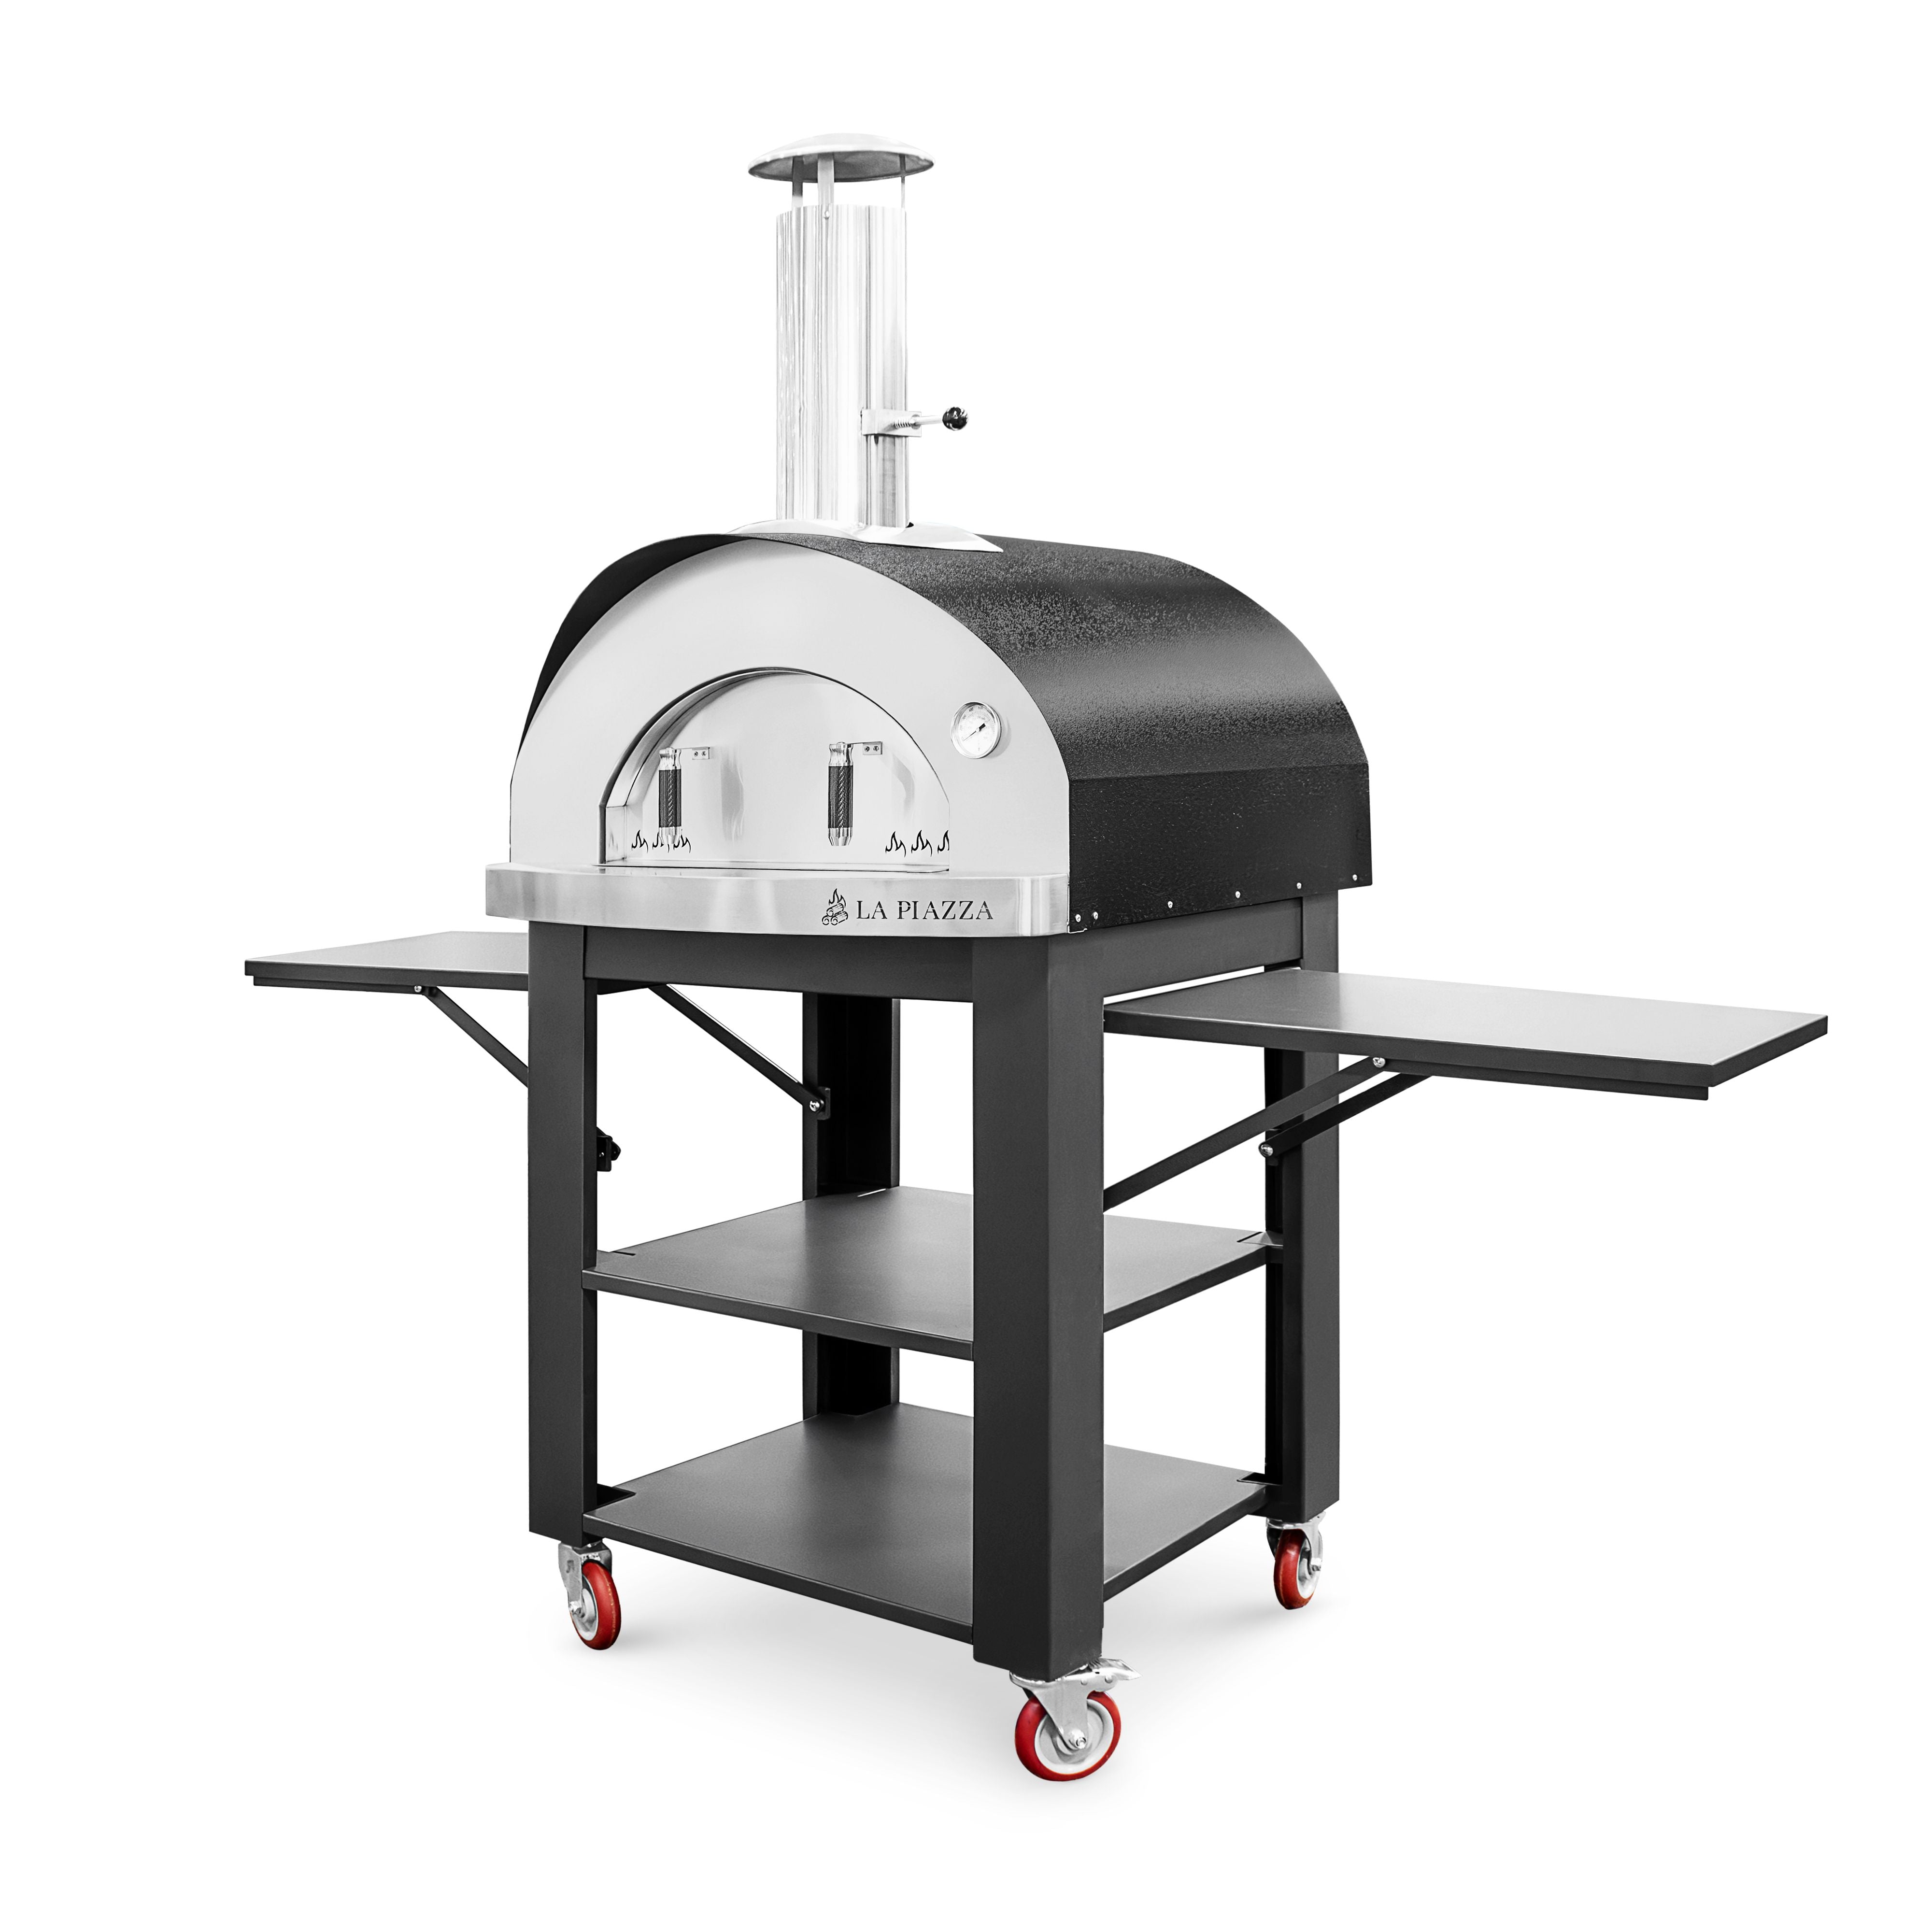 Toscana Wood Oven with Stainless Steel Base - Black